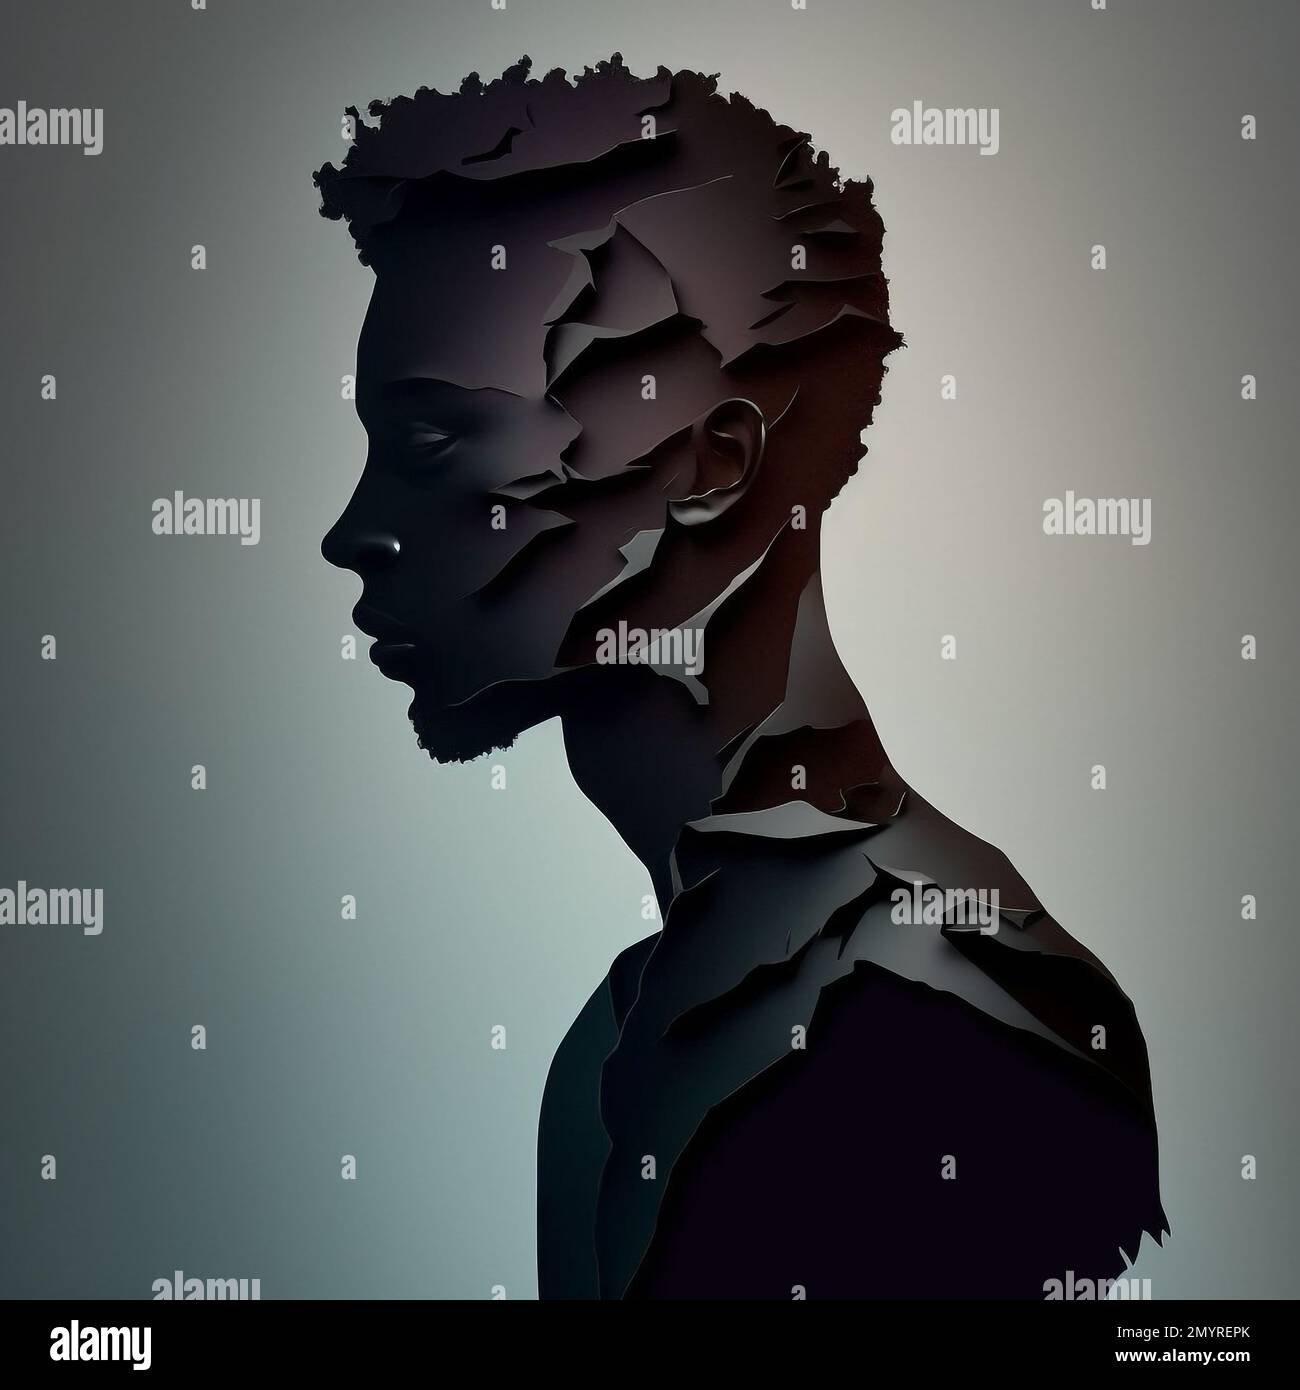 Black man silhouette. Black lives matter . African American . High quality 3d illustration Stock Photo